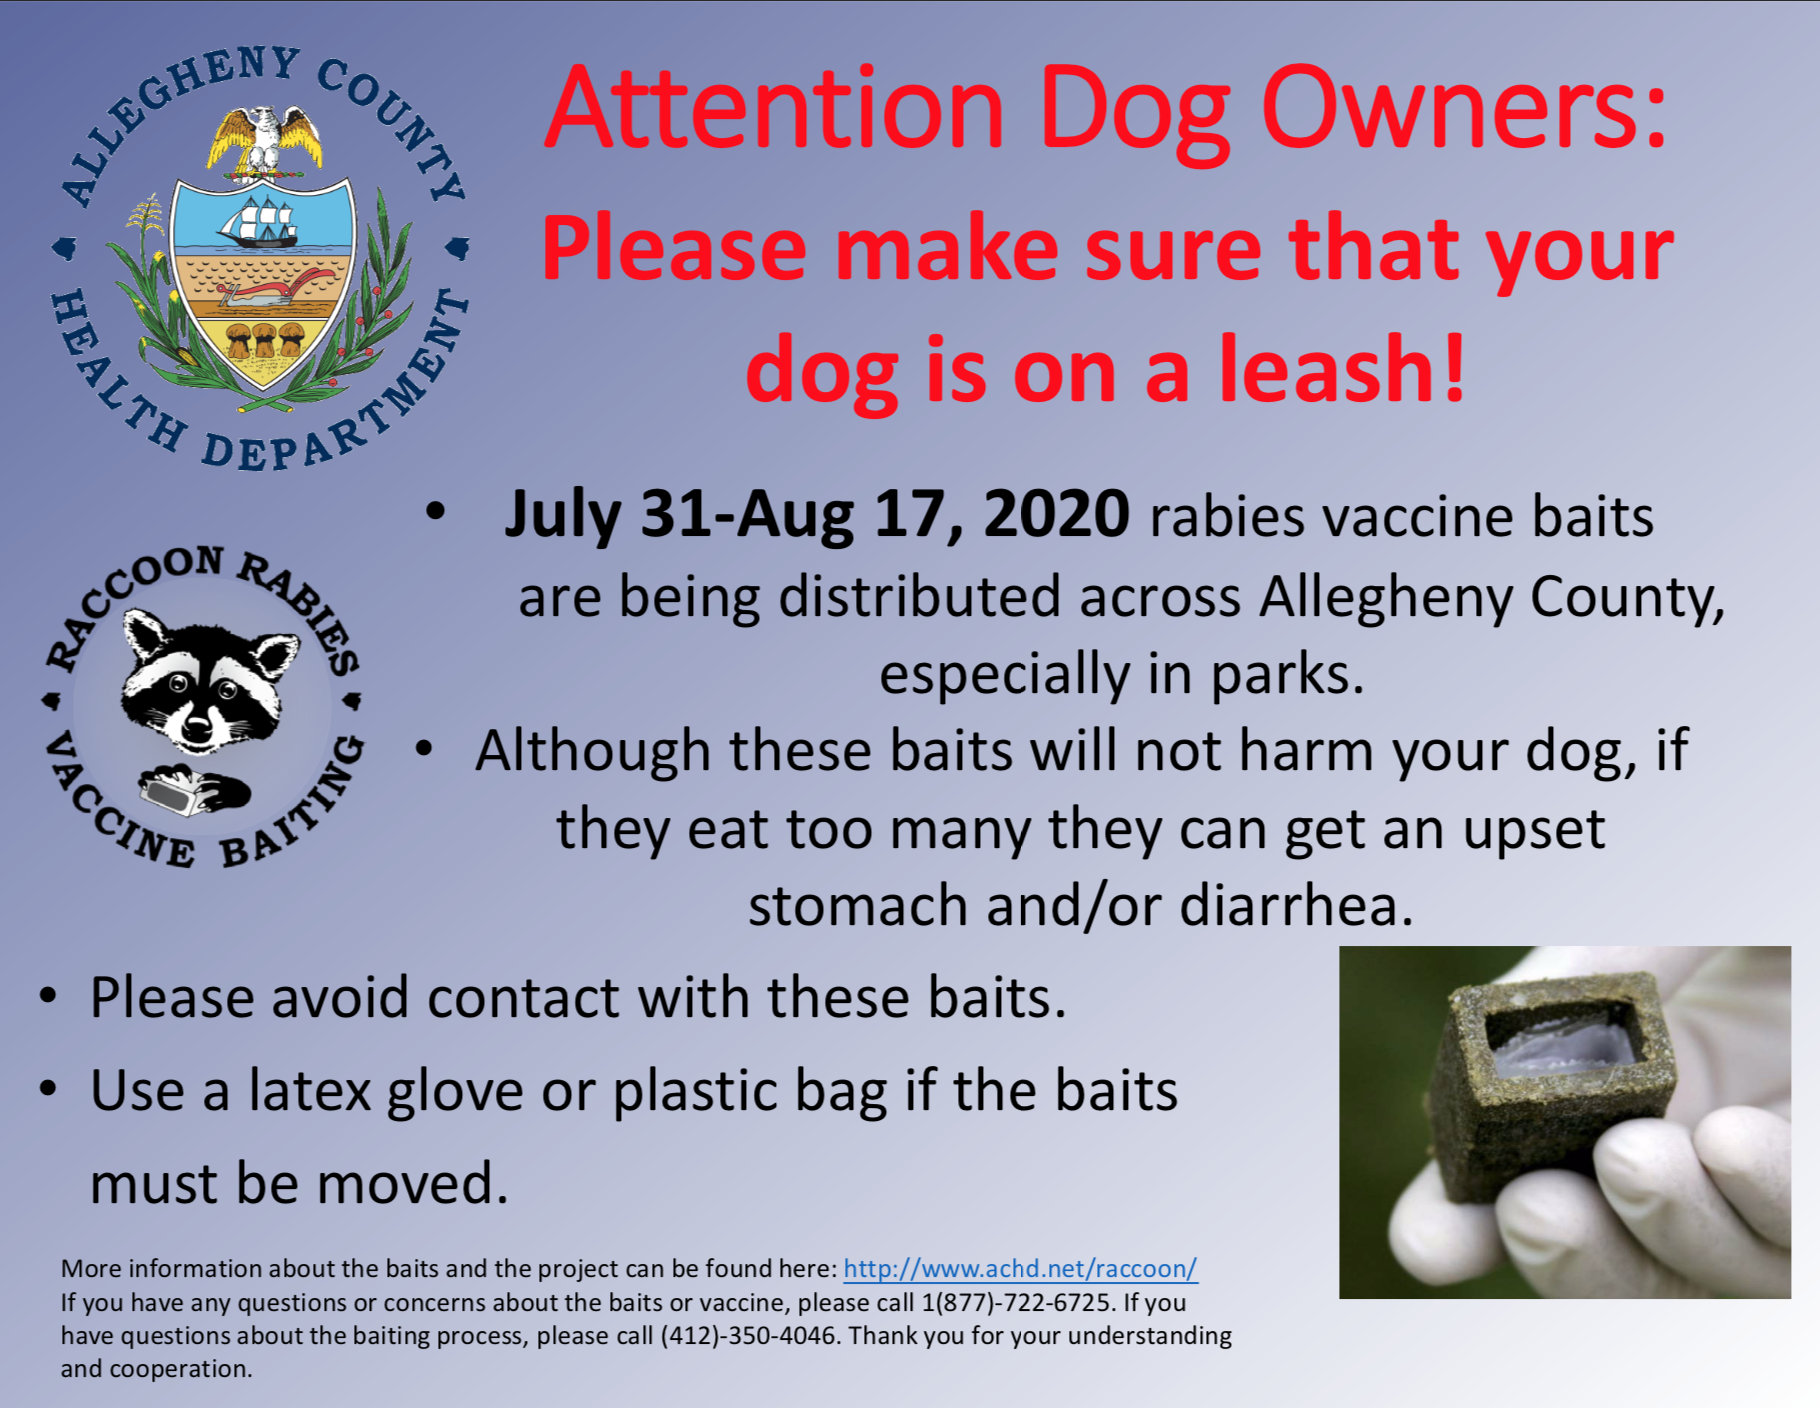 Protect your dogs!